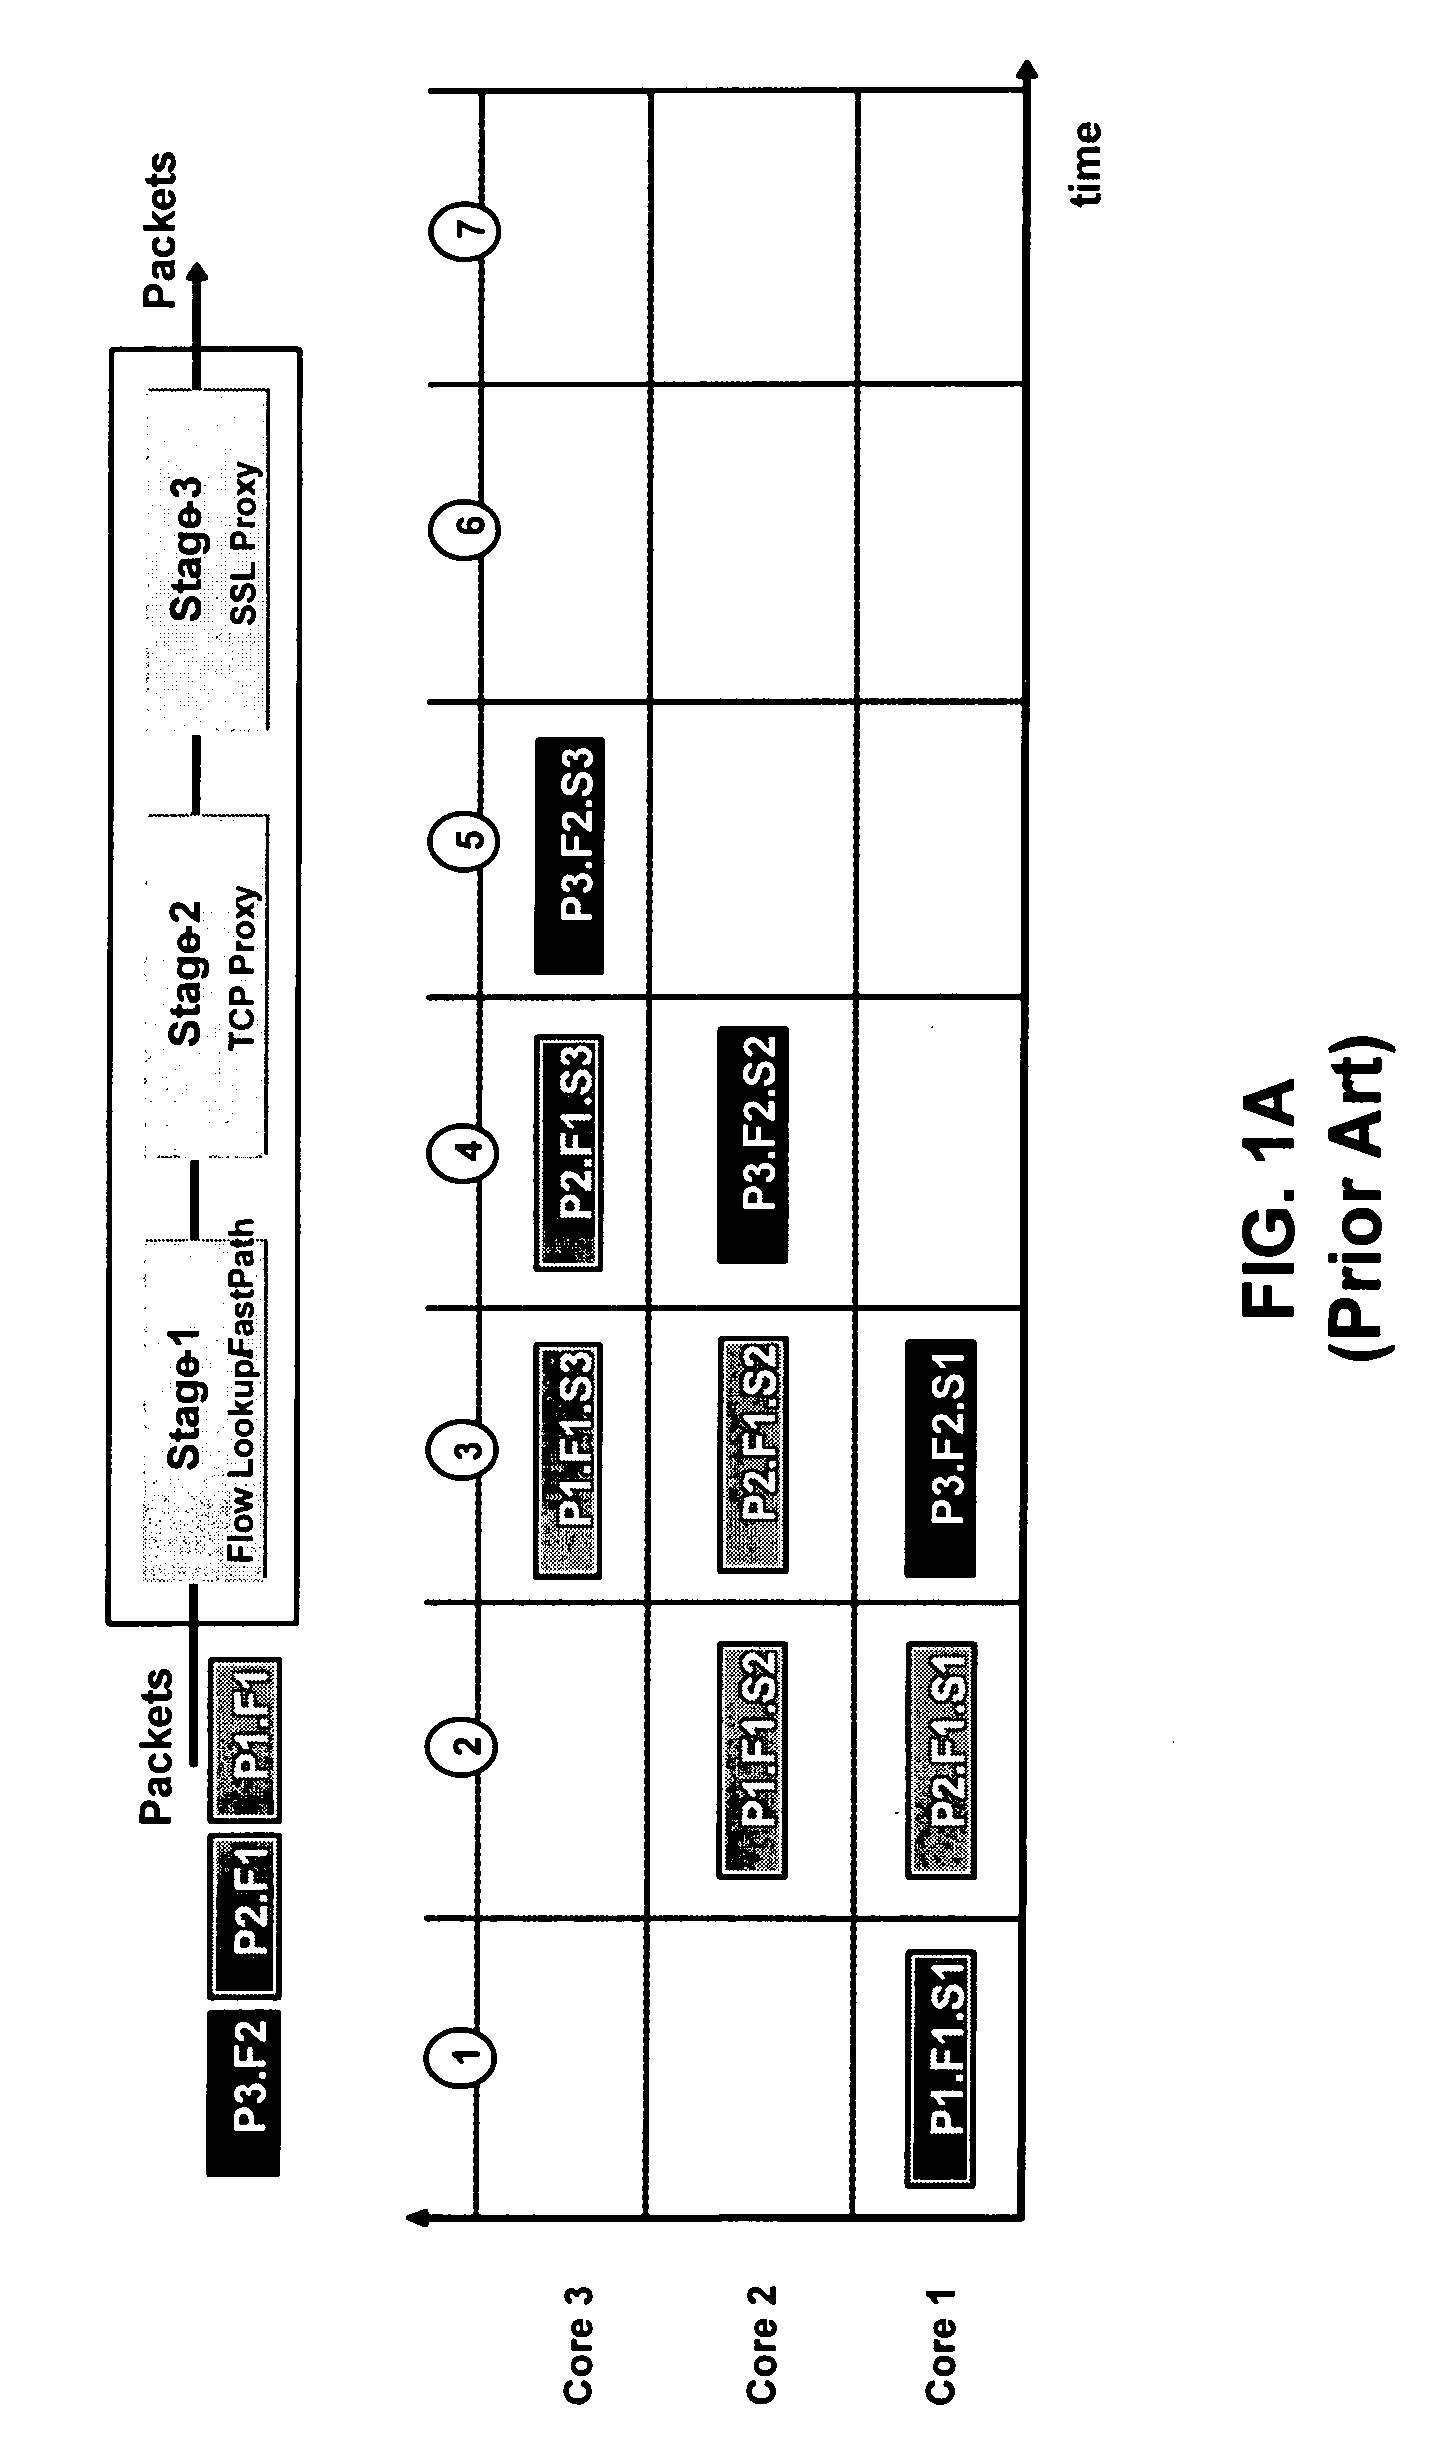 Multi-stage multi-core processing of network packets